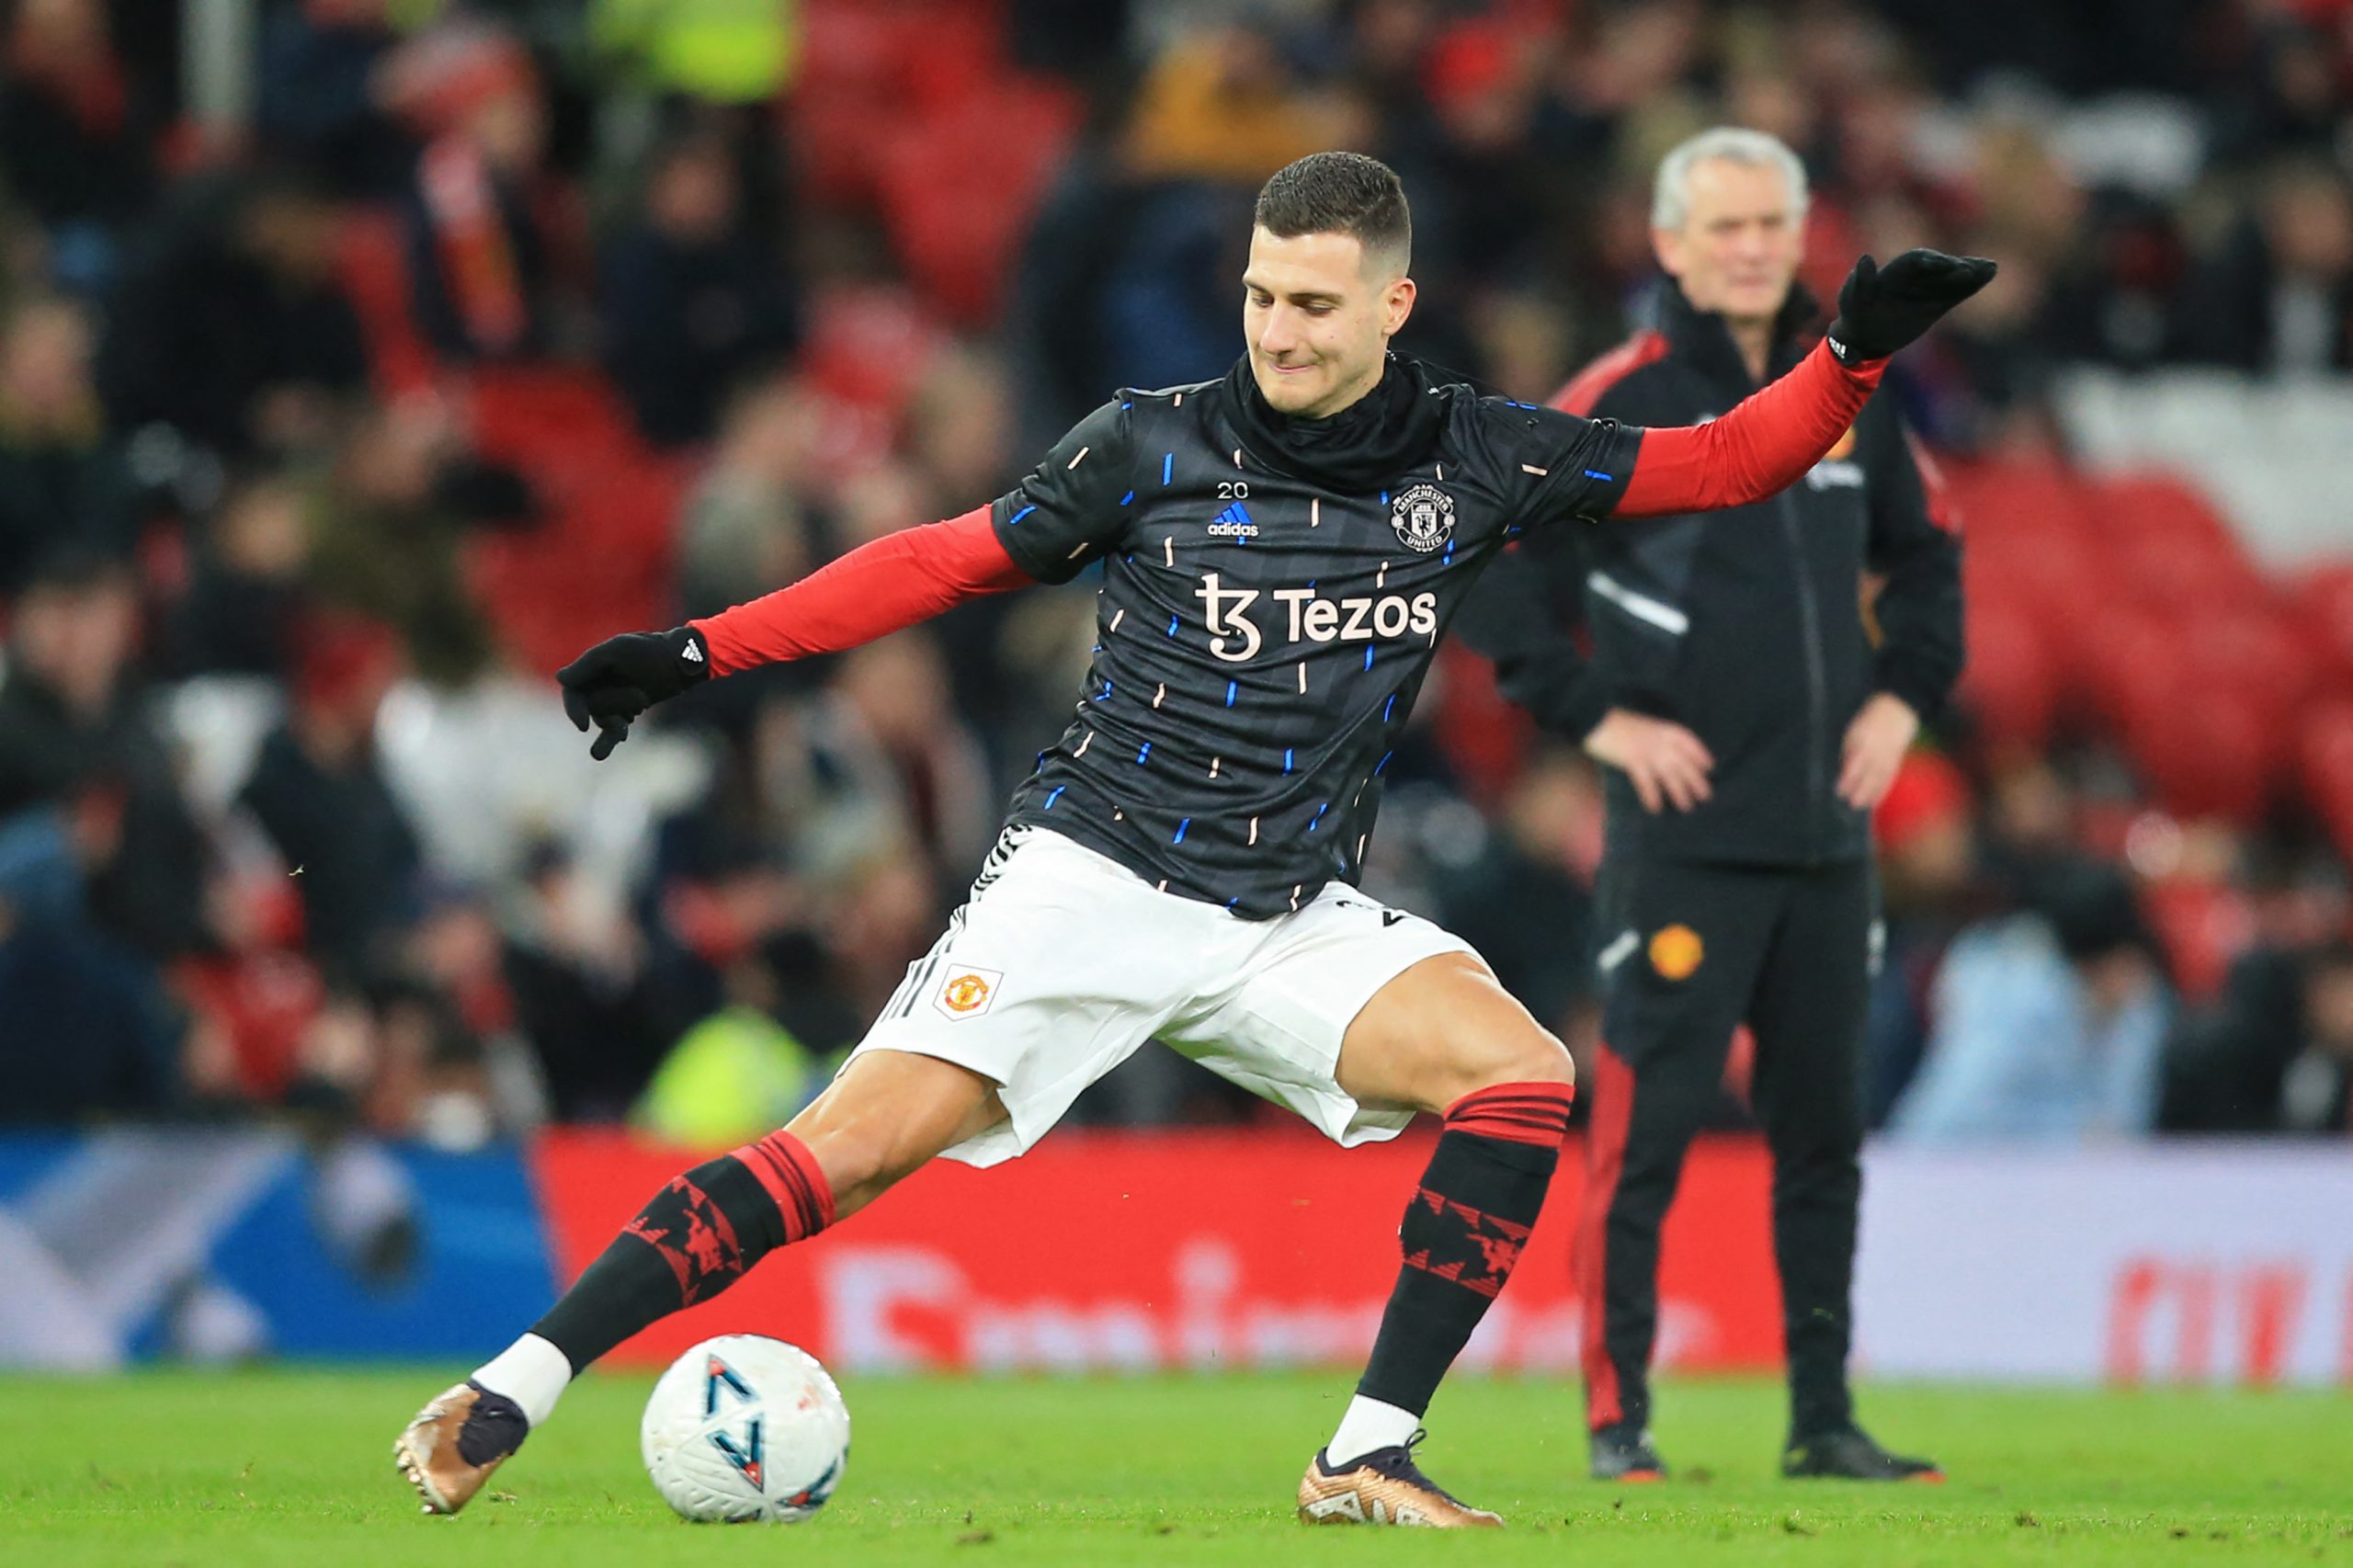 Manchester United's Portuguese defender Diogo Dalot warms-up ahead of the English FA Cup third round football match between Manchester United and Everton at Old Trafford in Manchester, north west England, on January 6, 2023.